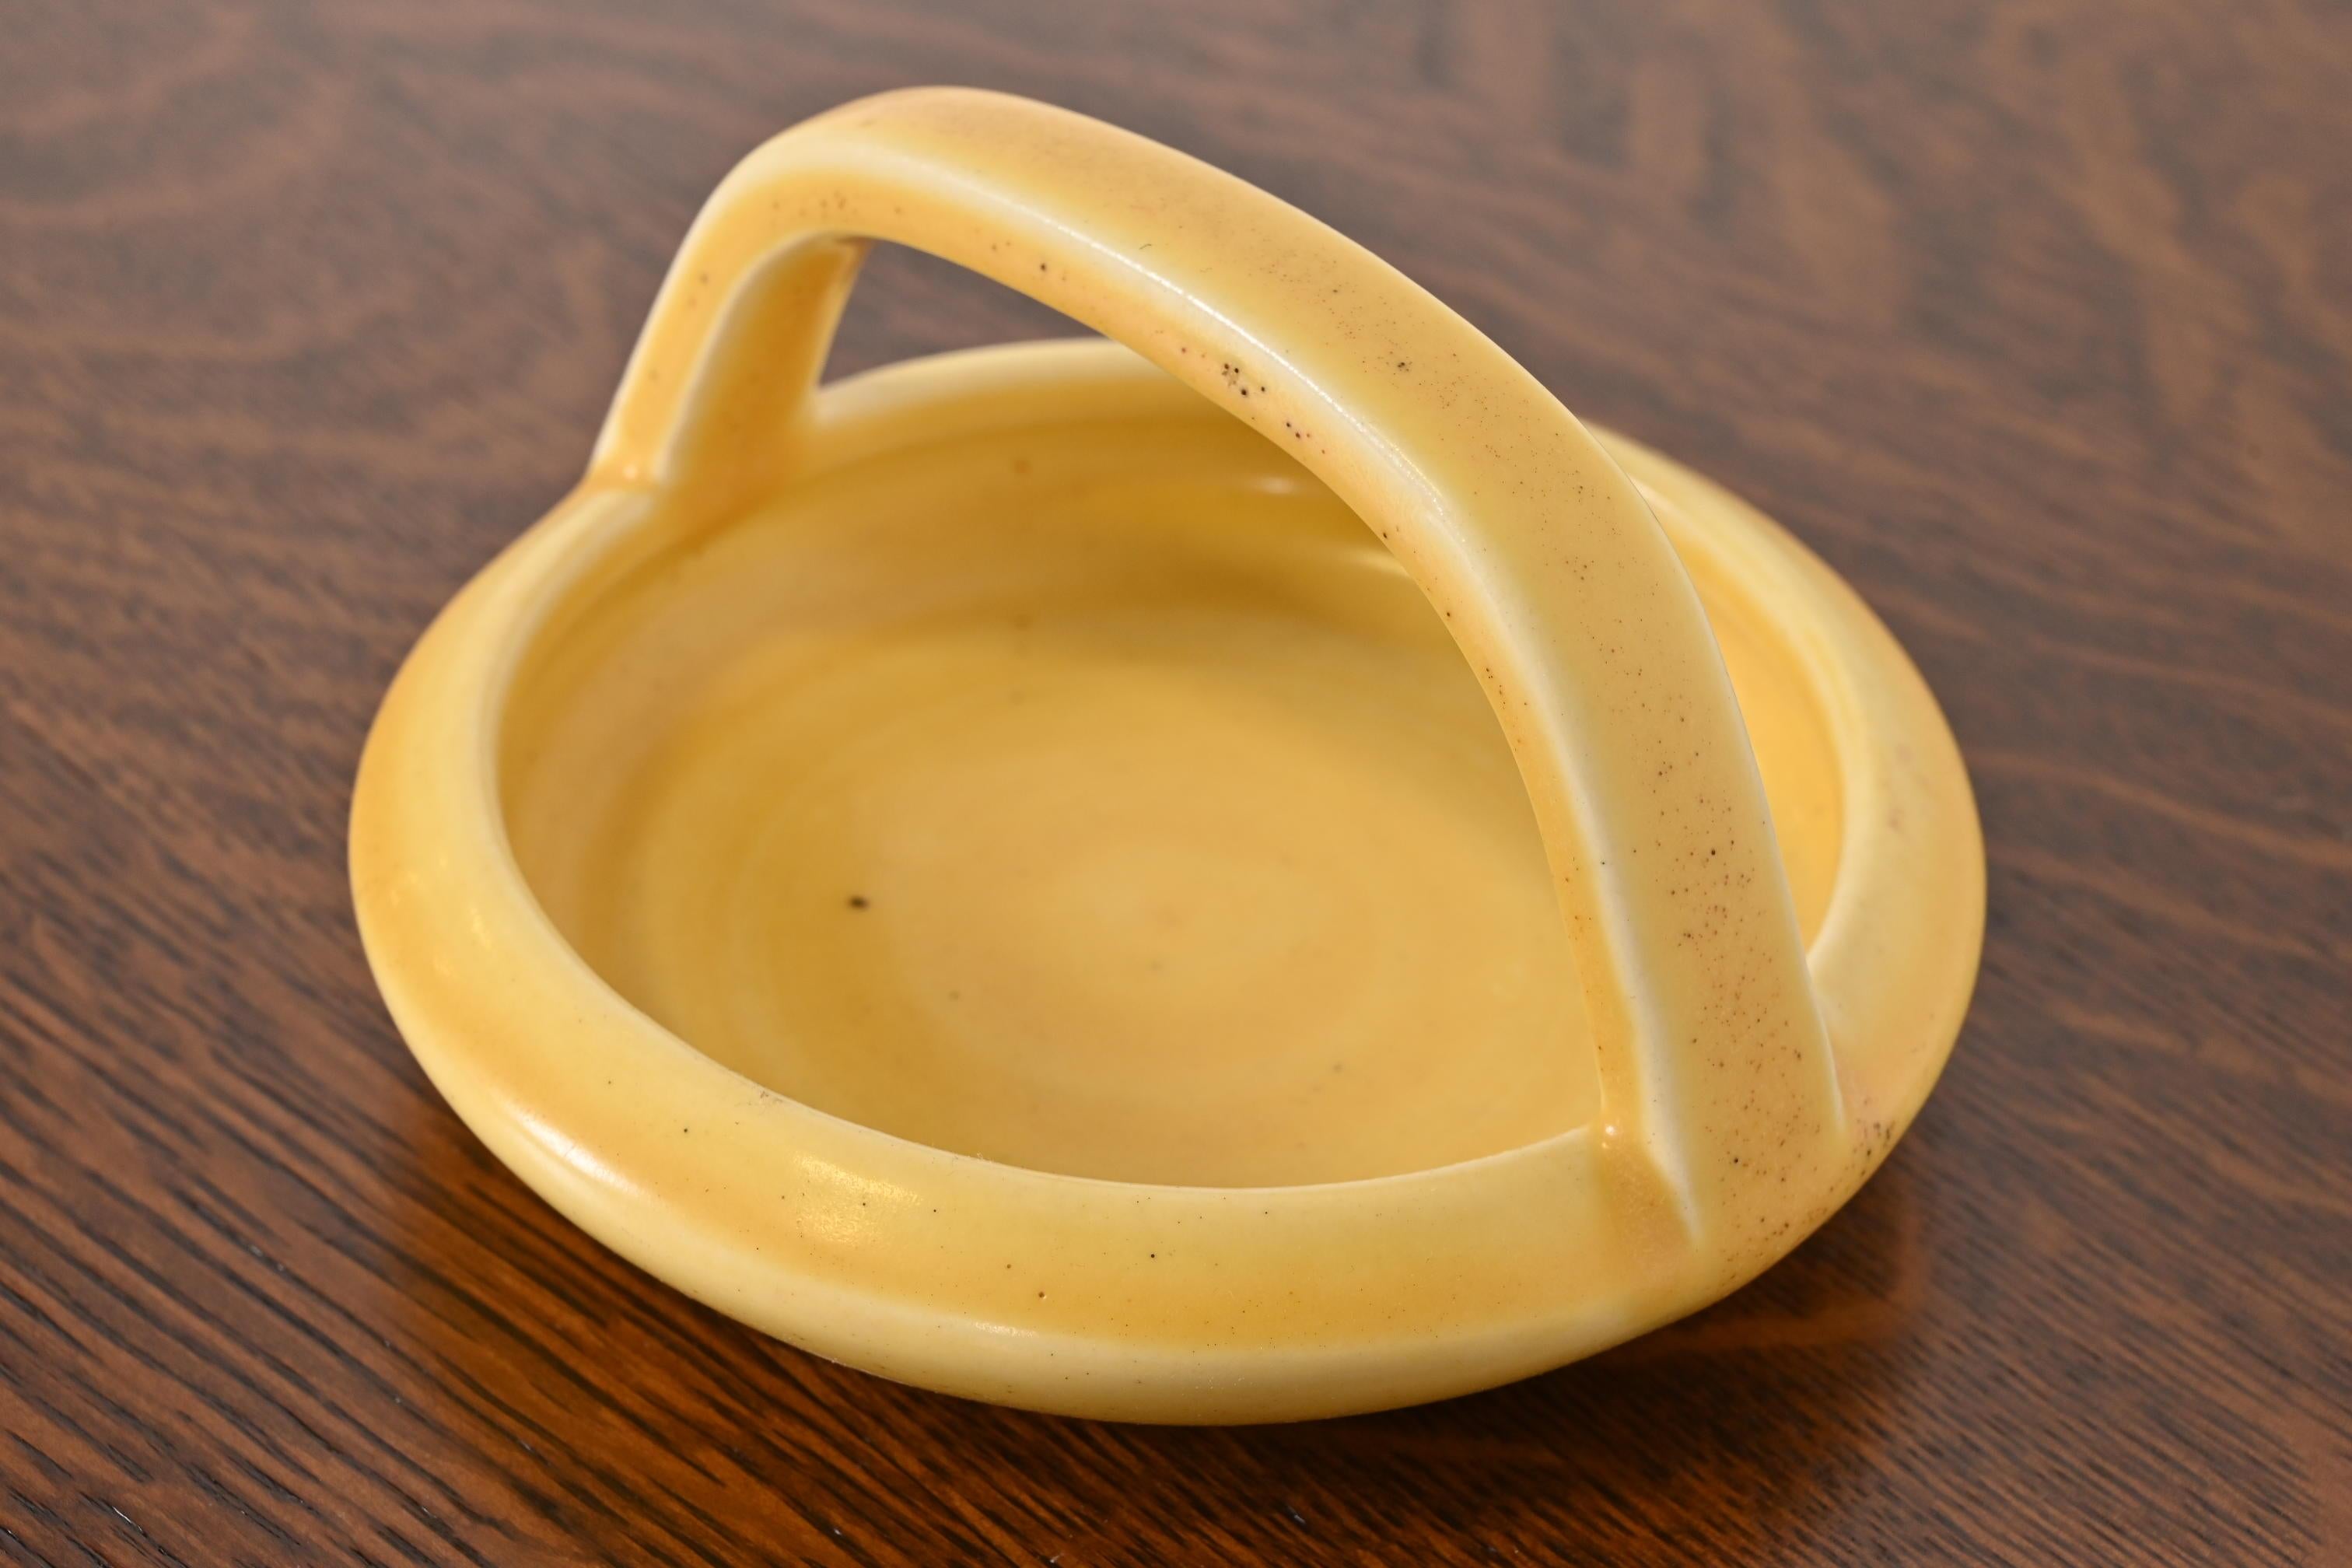 American Rookwood Pottery Arts & Crafts Glazed Ceramic Yellow Handled Bowl or Ashtray For Sale